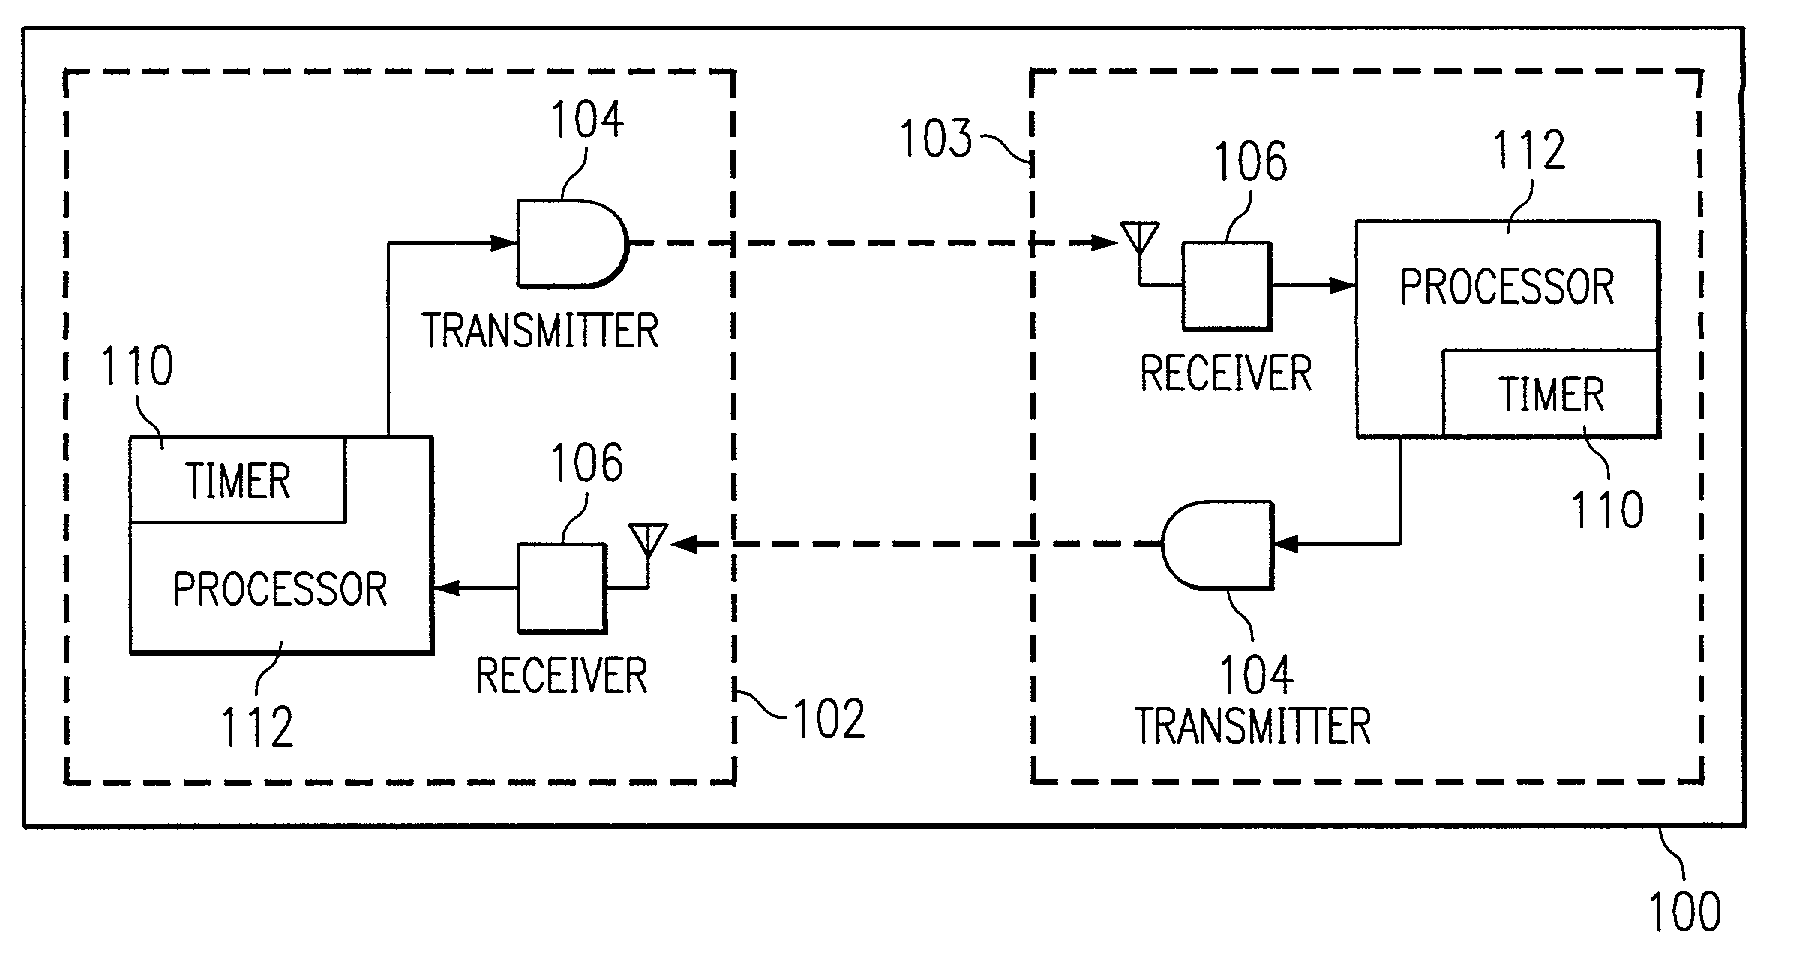 Method of synchronizing servo timing in an optical wireless link